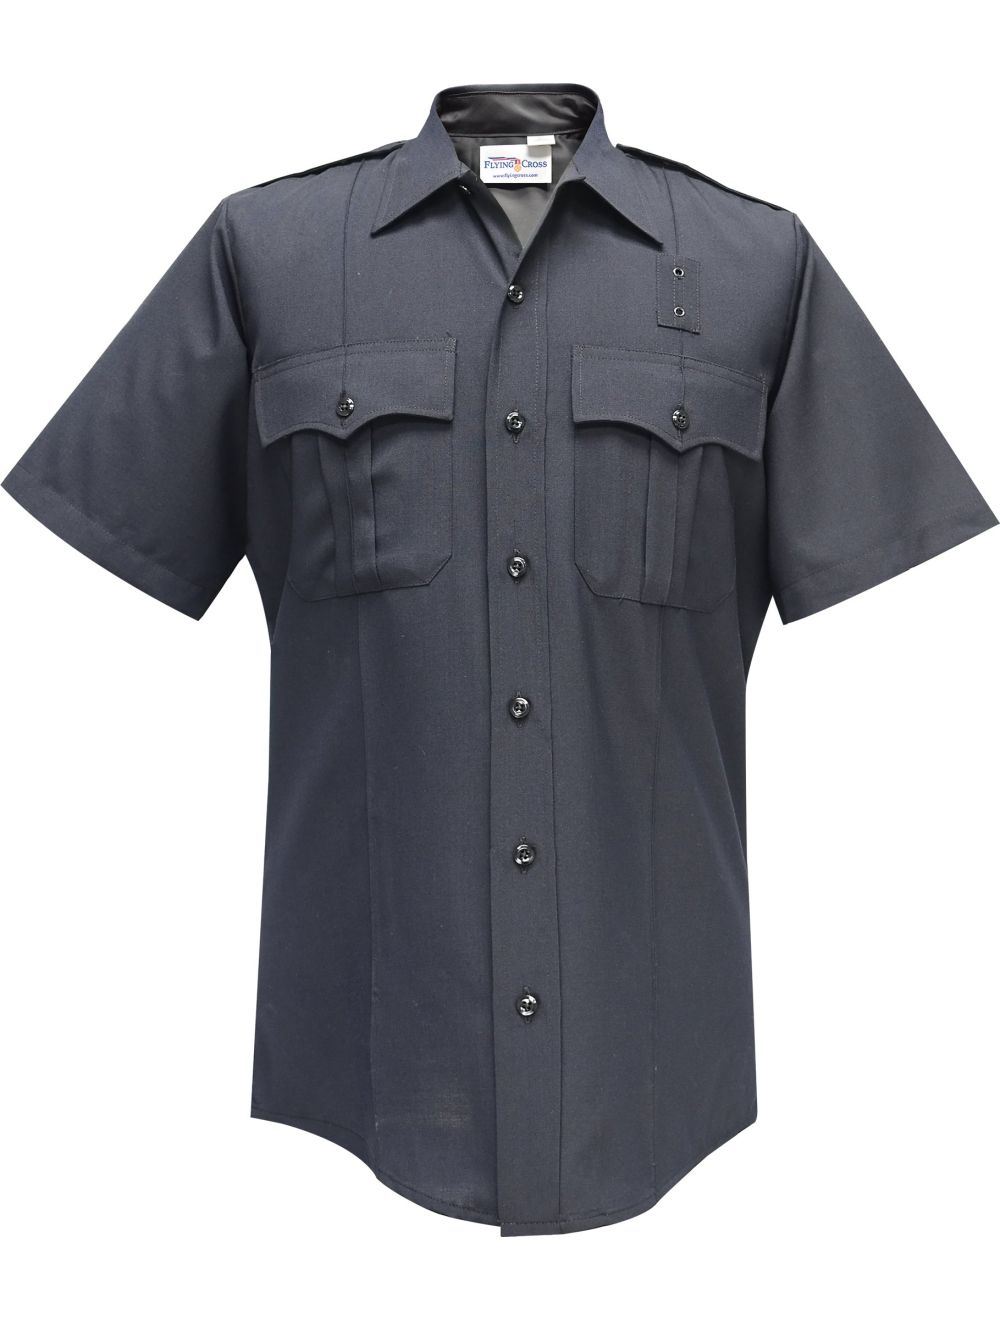 Justice Short Sleeve Shirt w/ Traditional Collar - LAPD Navy